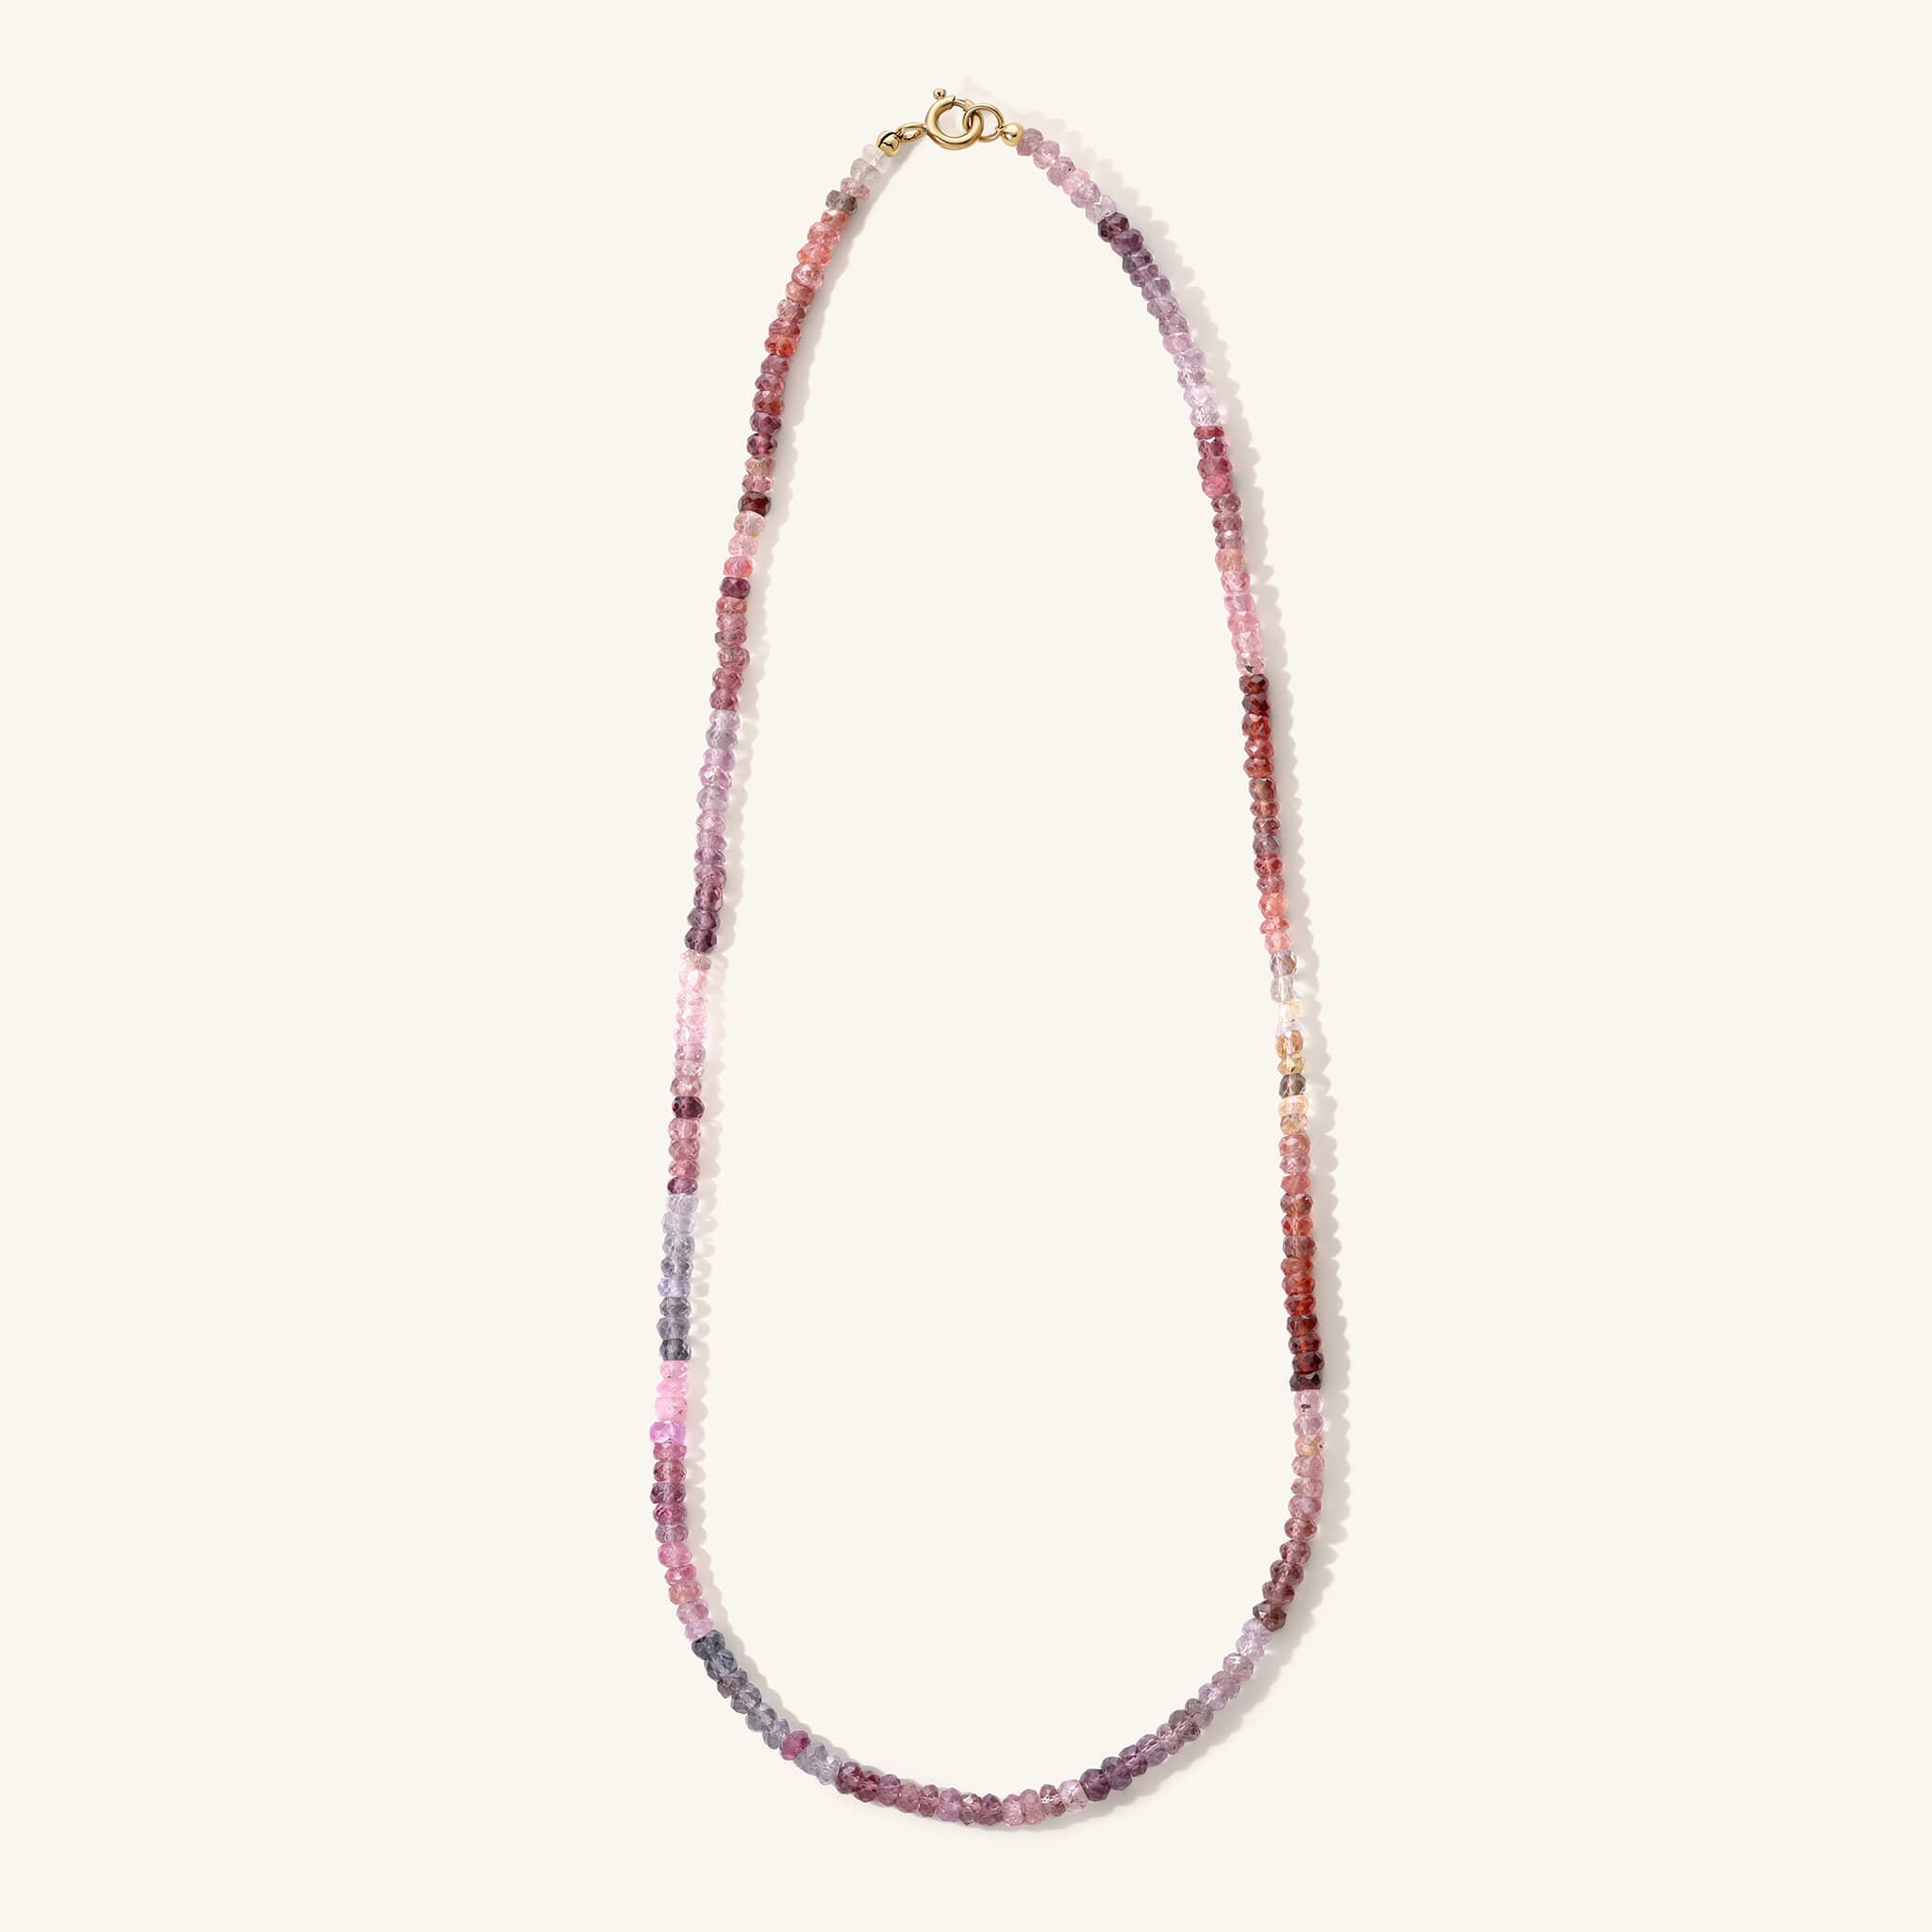 Plum Spinel Beaded Necklace